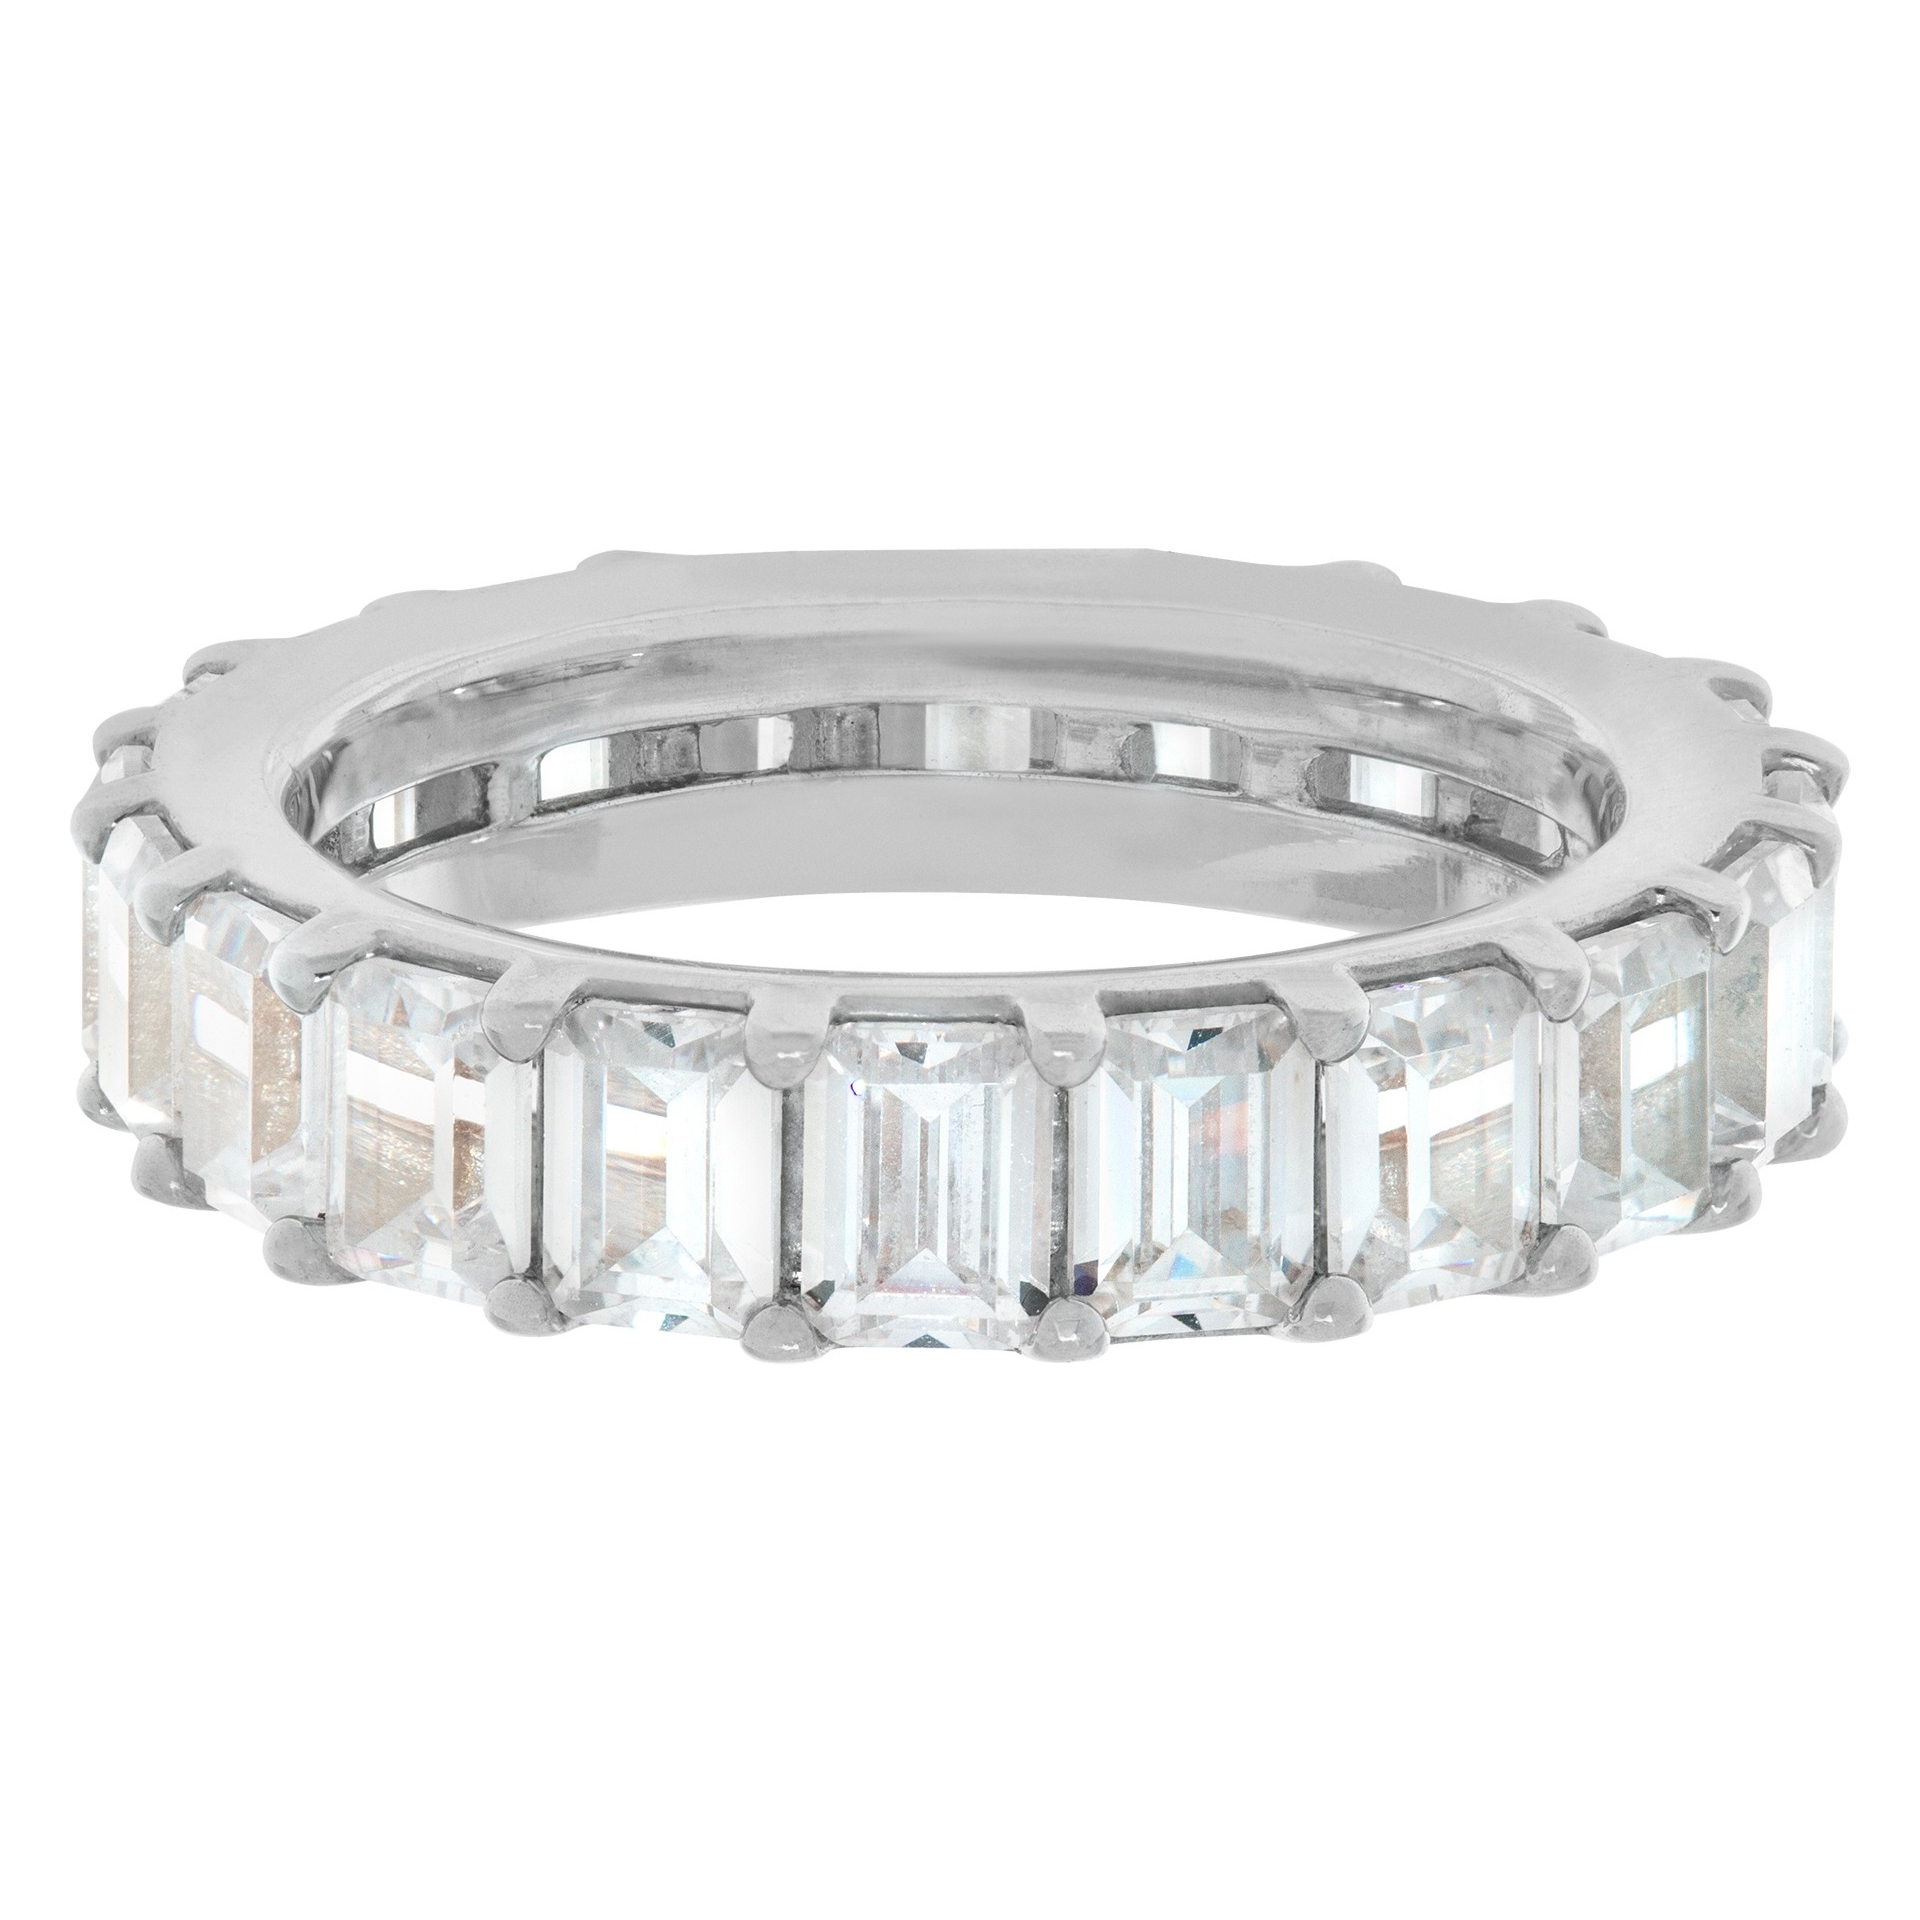 6.0ct Emerald Cut Diamond eternity band and ring